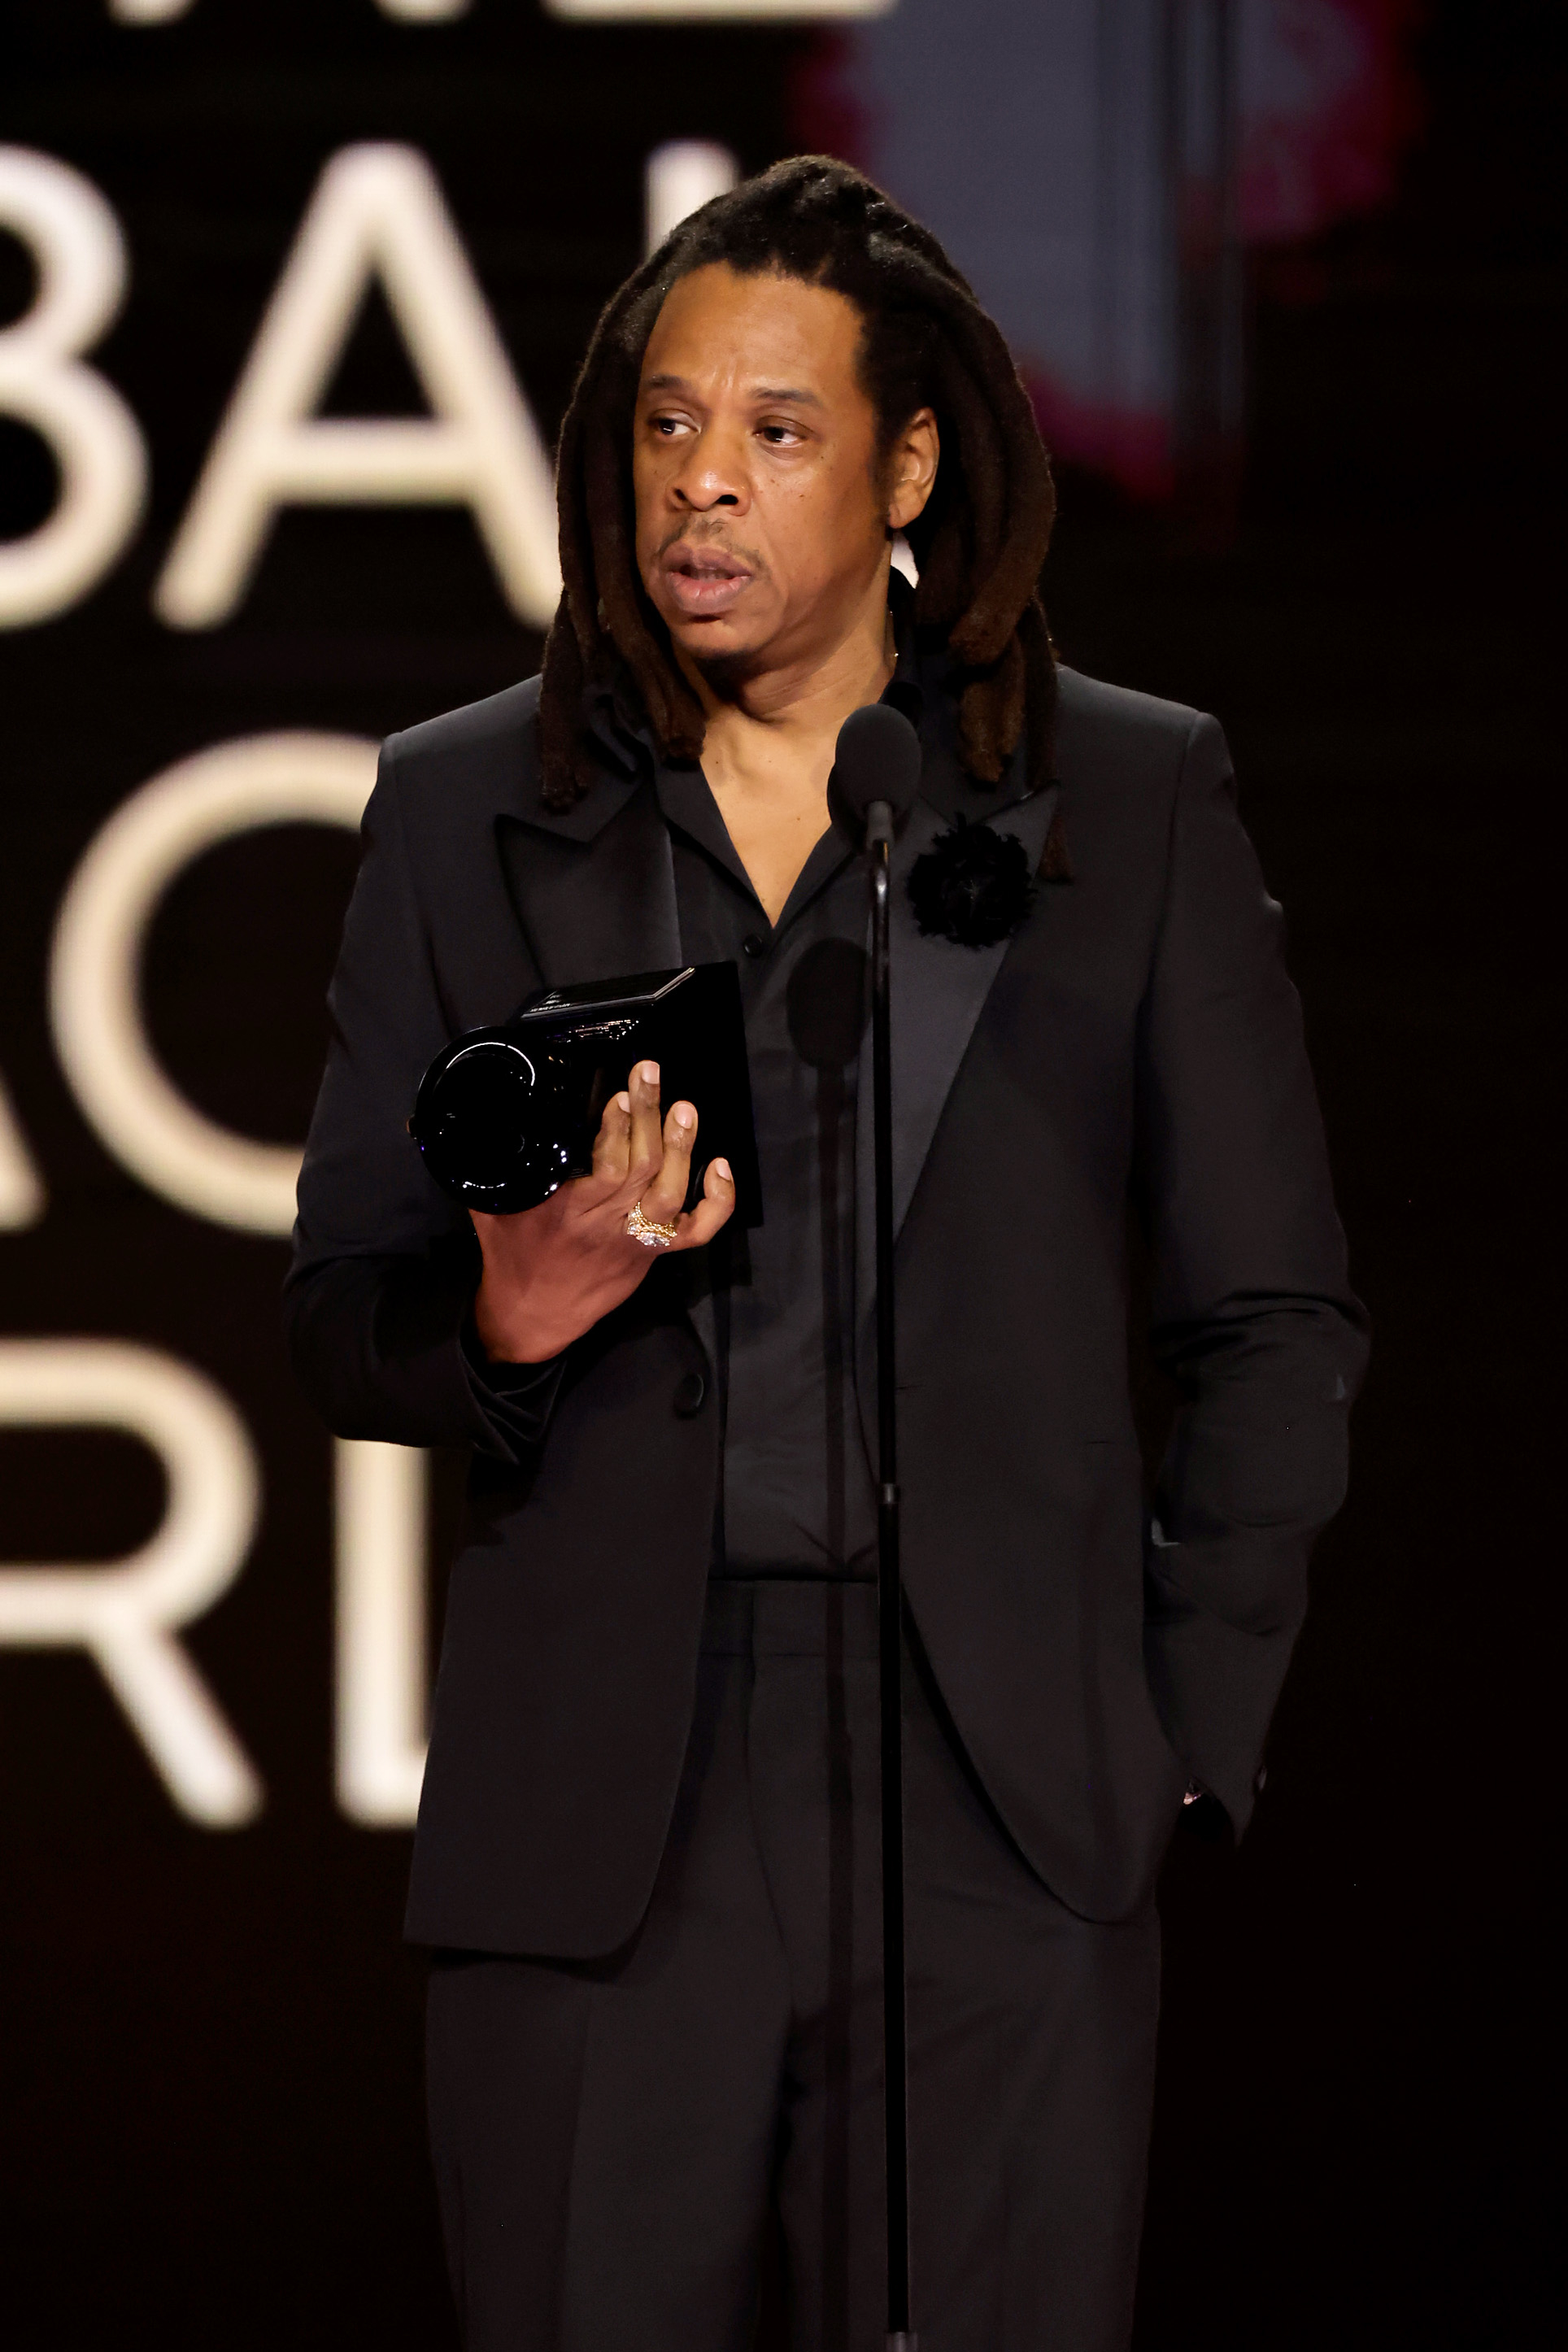 Jay-Z speaks at a podium during an awards ceremony, wearing a formal black suit and holding a trophy